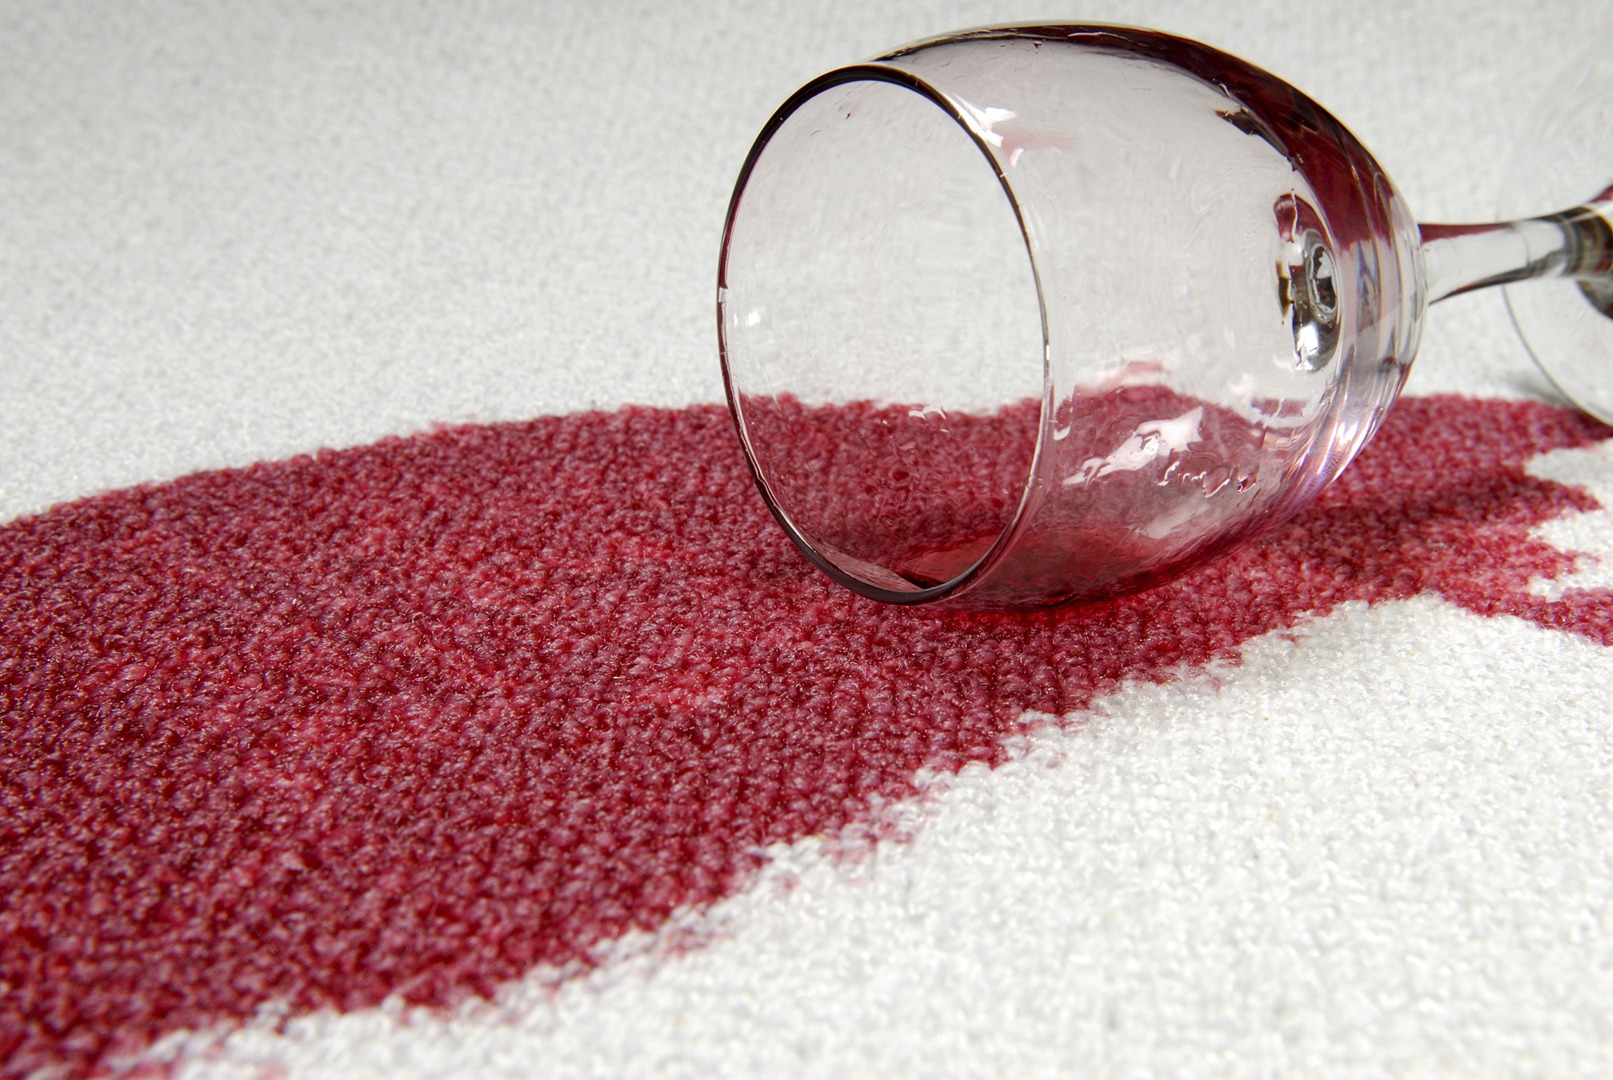 Reasons to Enlist the Help of Commercial Carpet Cleaners